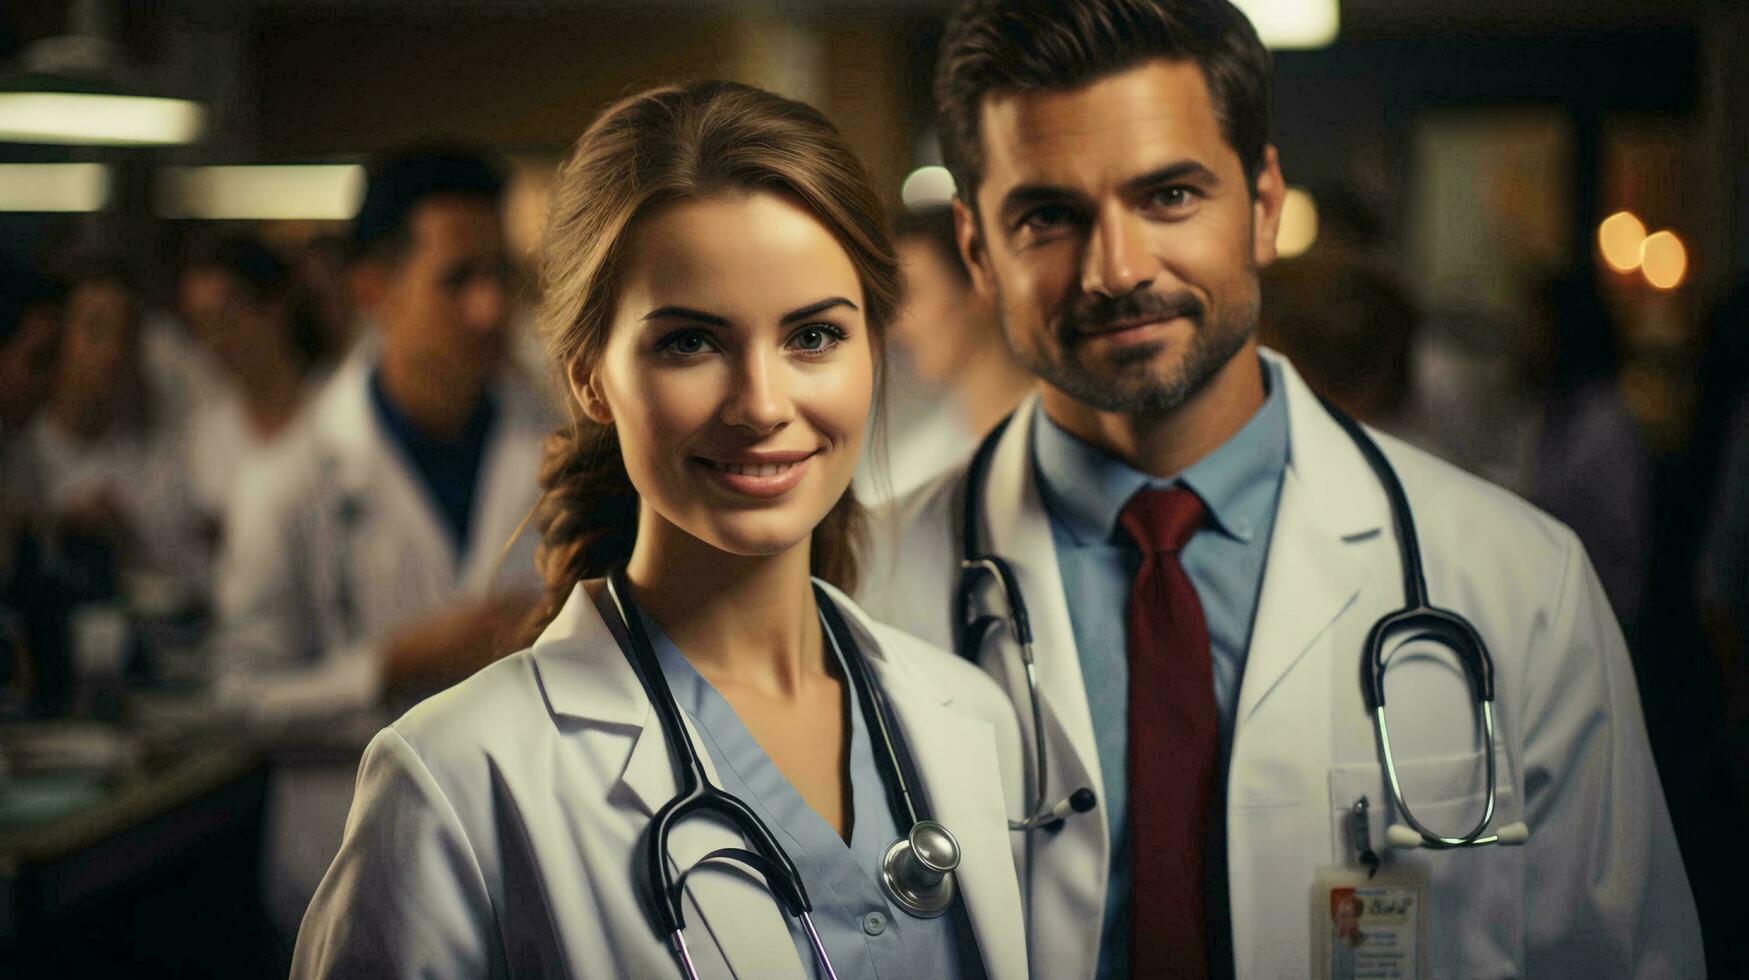 Team of medical workers doctors smiling in hospital, medicine and healthcare concept photo